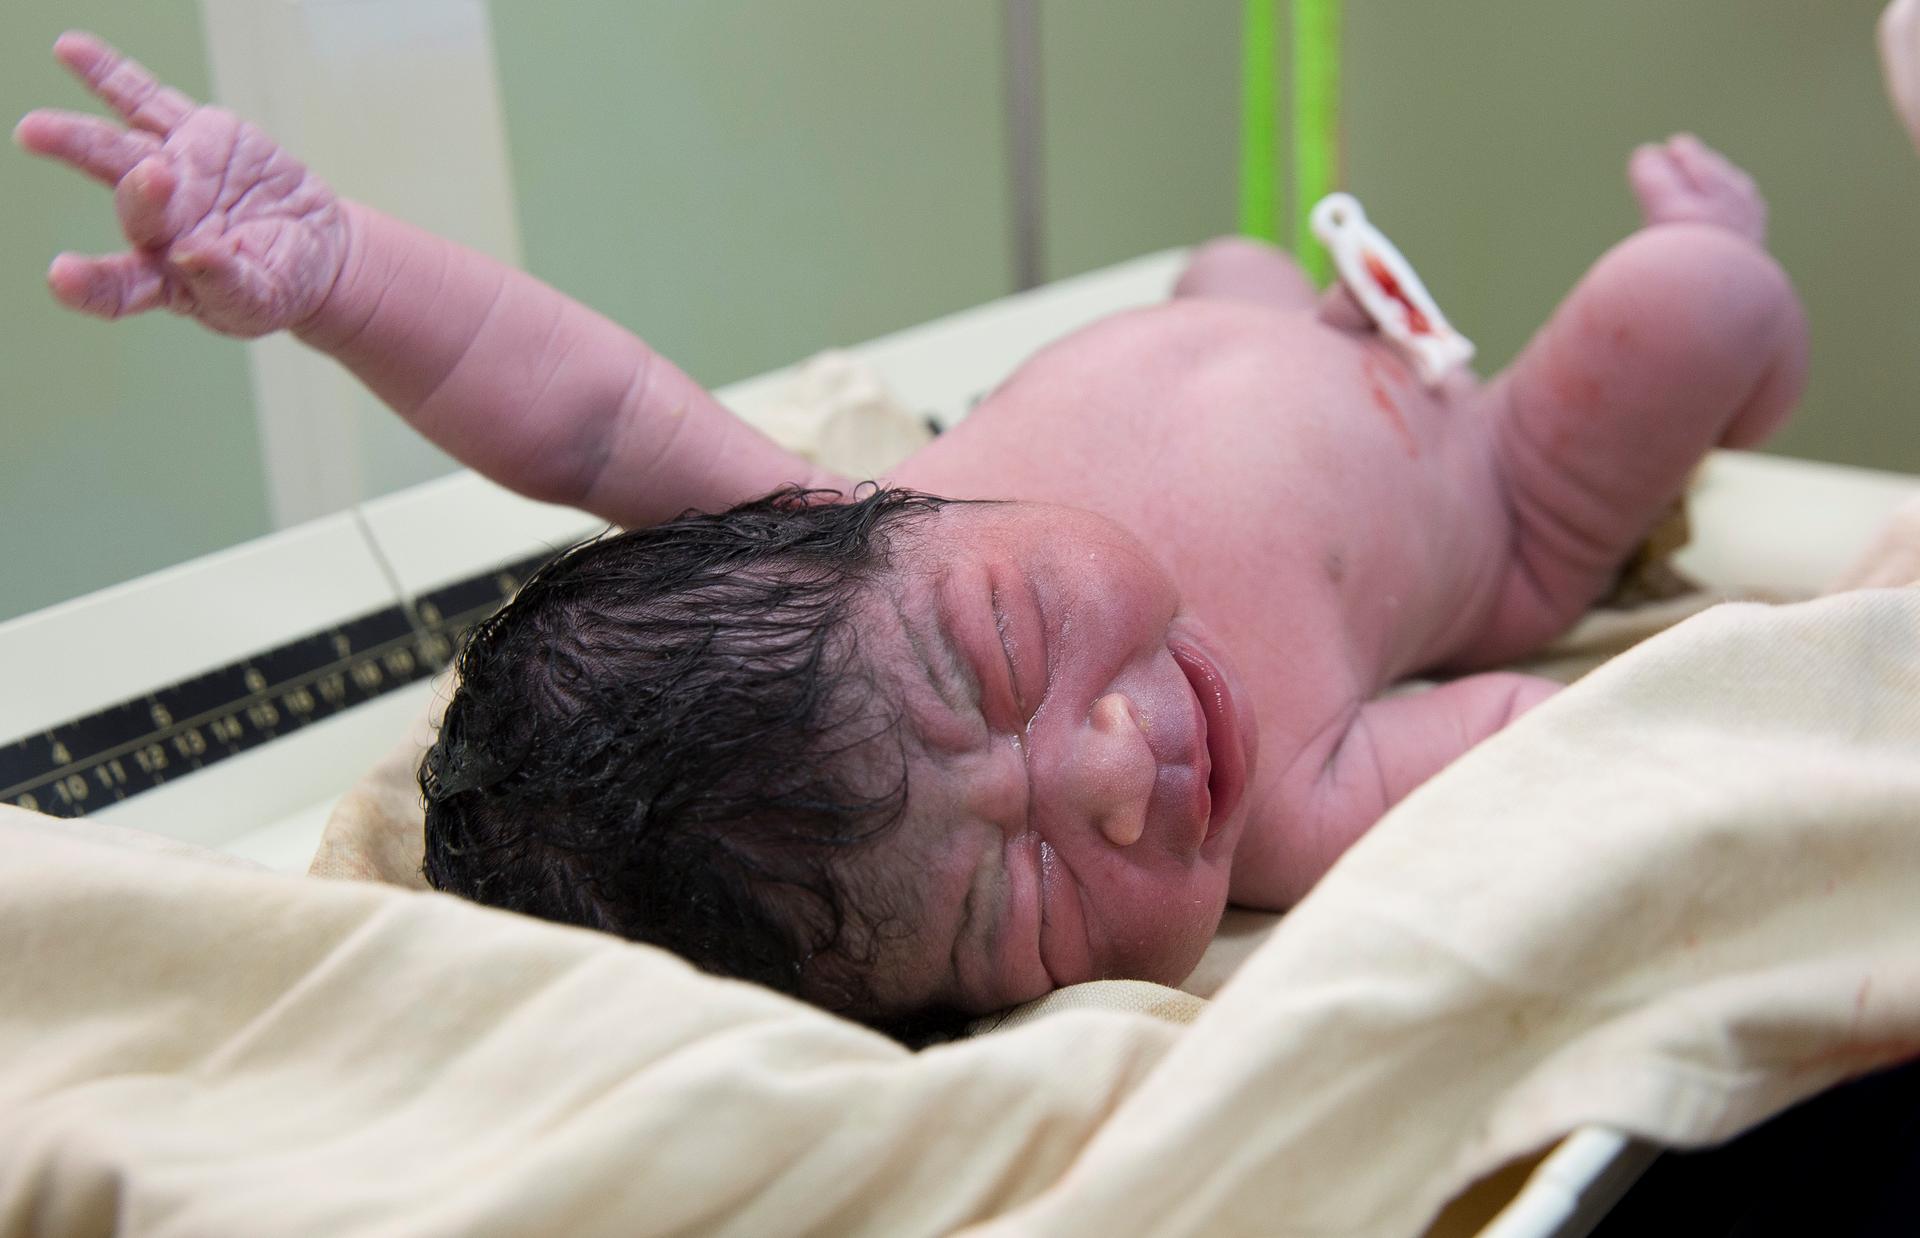 newborn baby with black wet hair and fist raised and clipped belly button